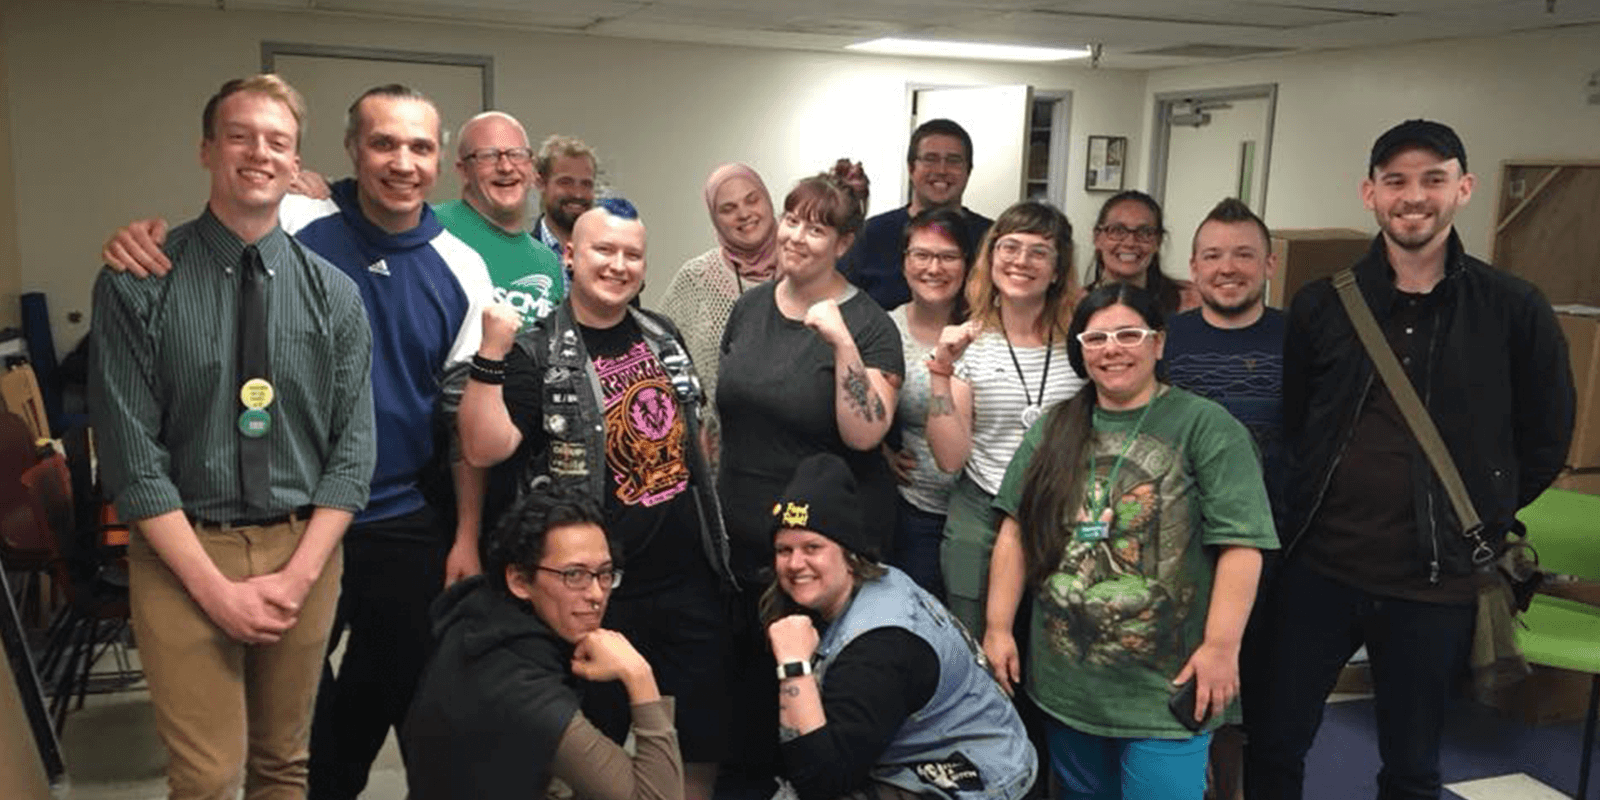 128 Oregon Workers Say Yes to AFSCME